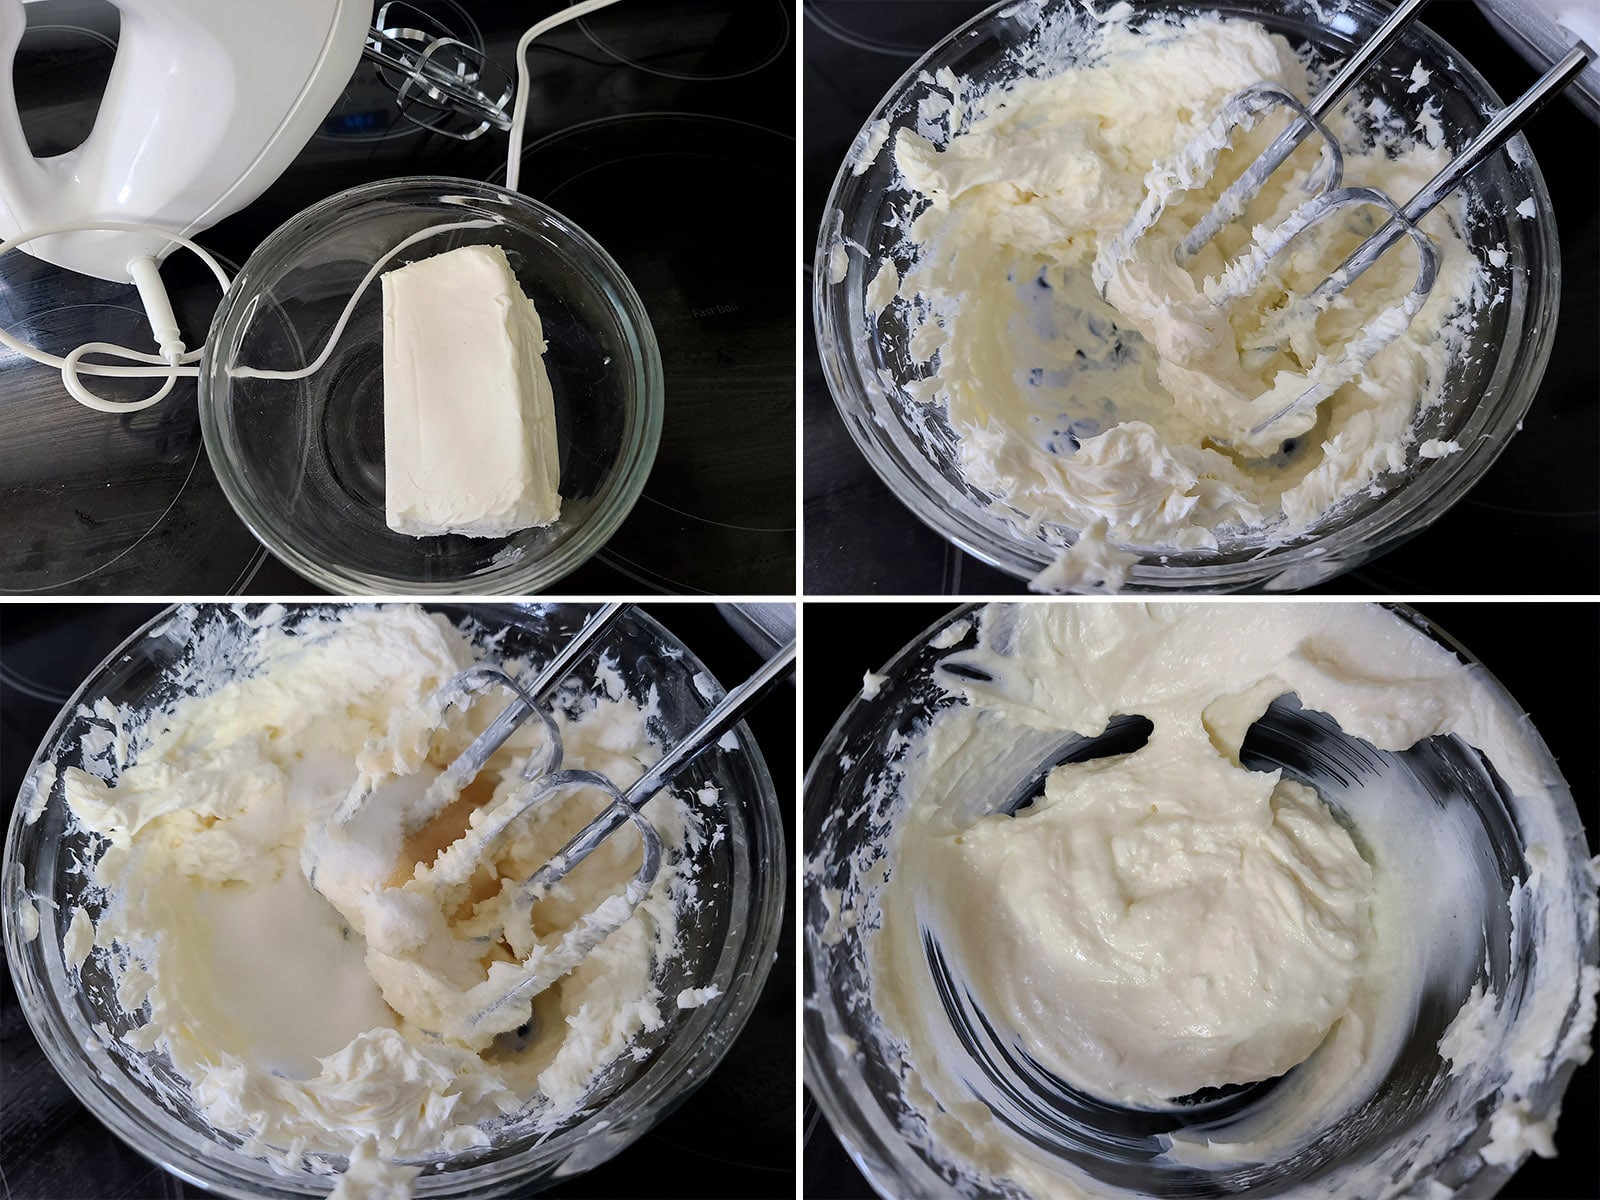 A 4 part image showing the cream cheese filling being made.